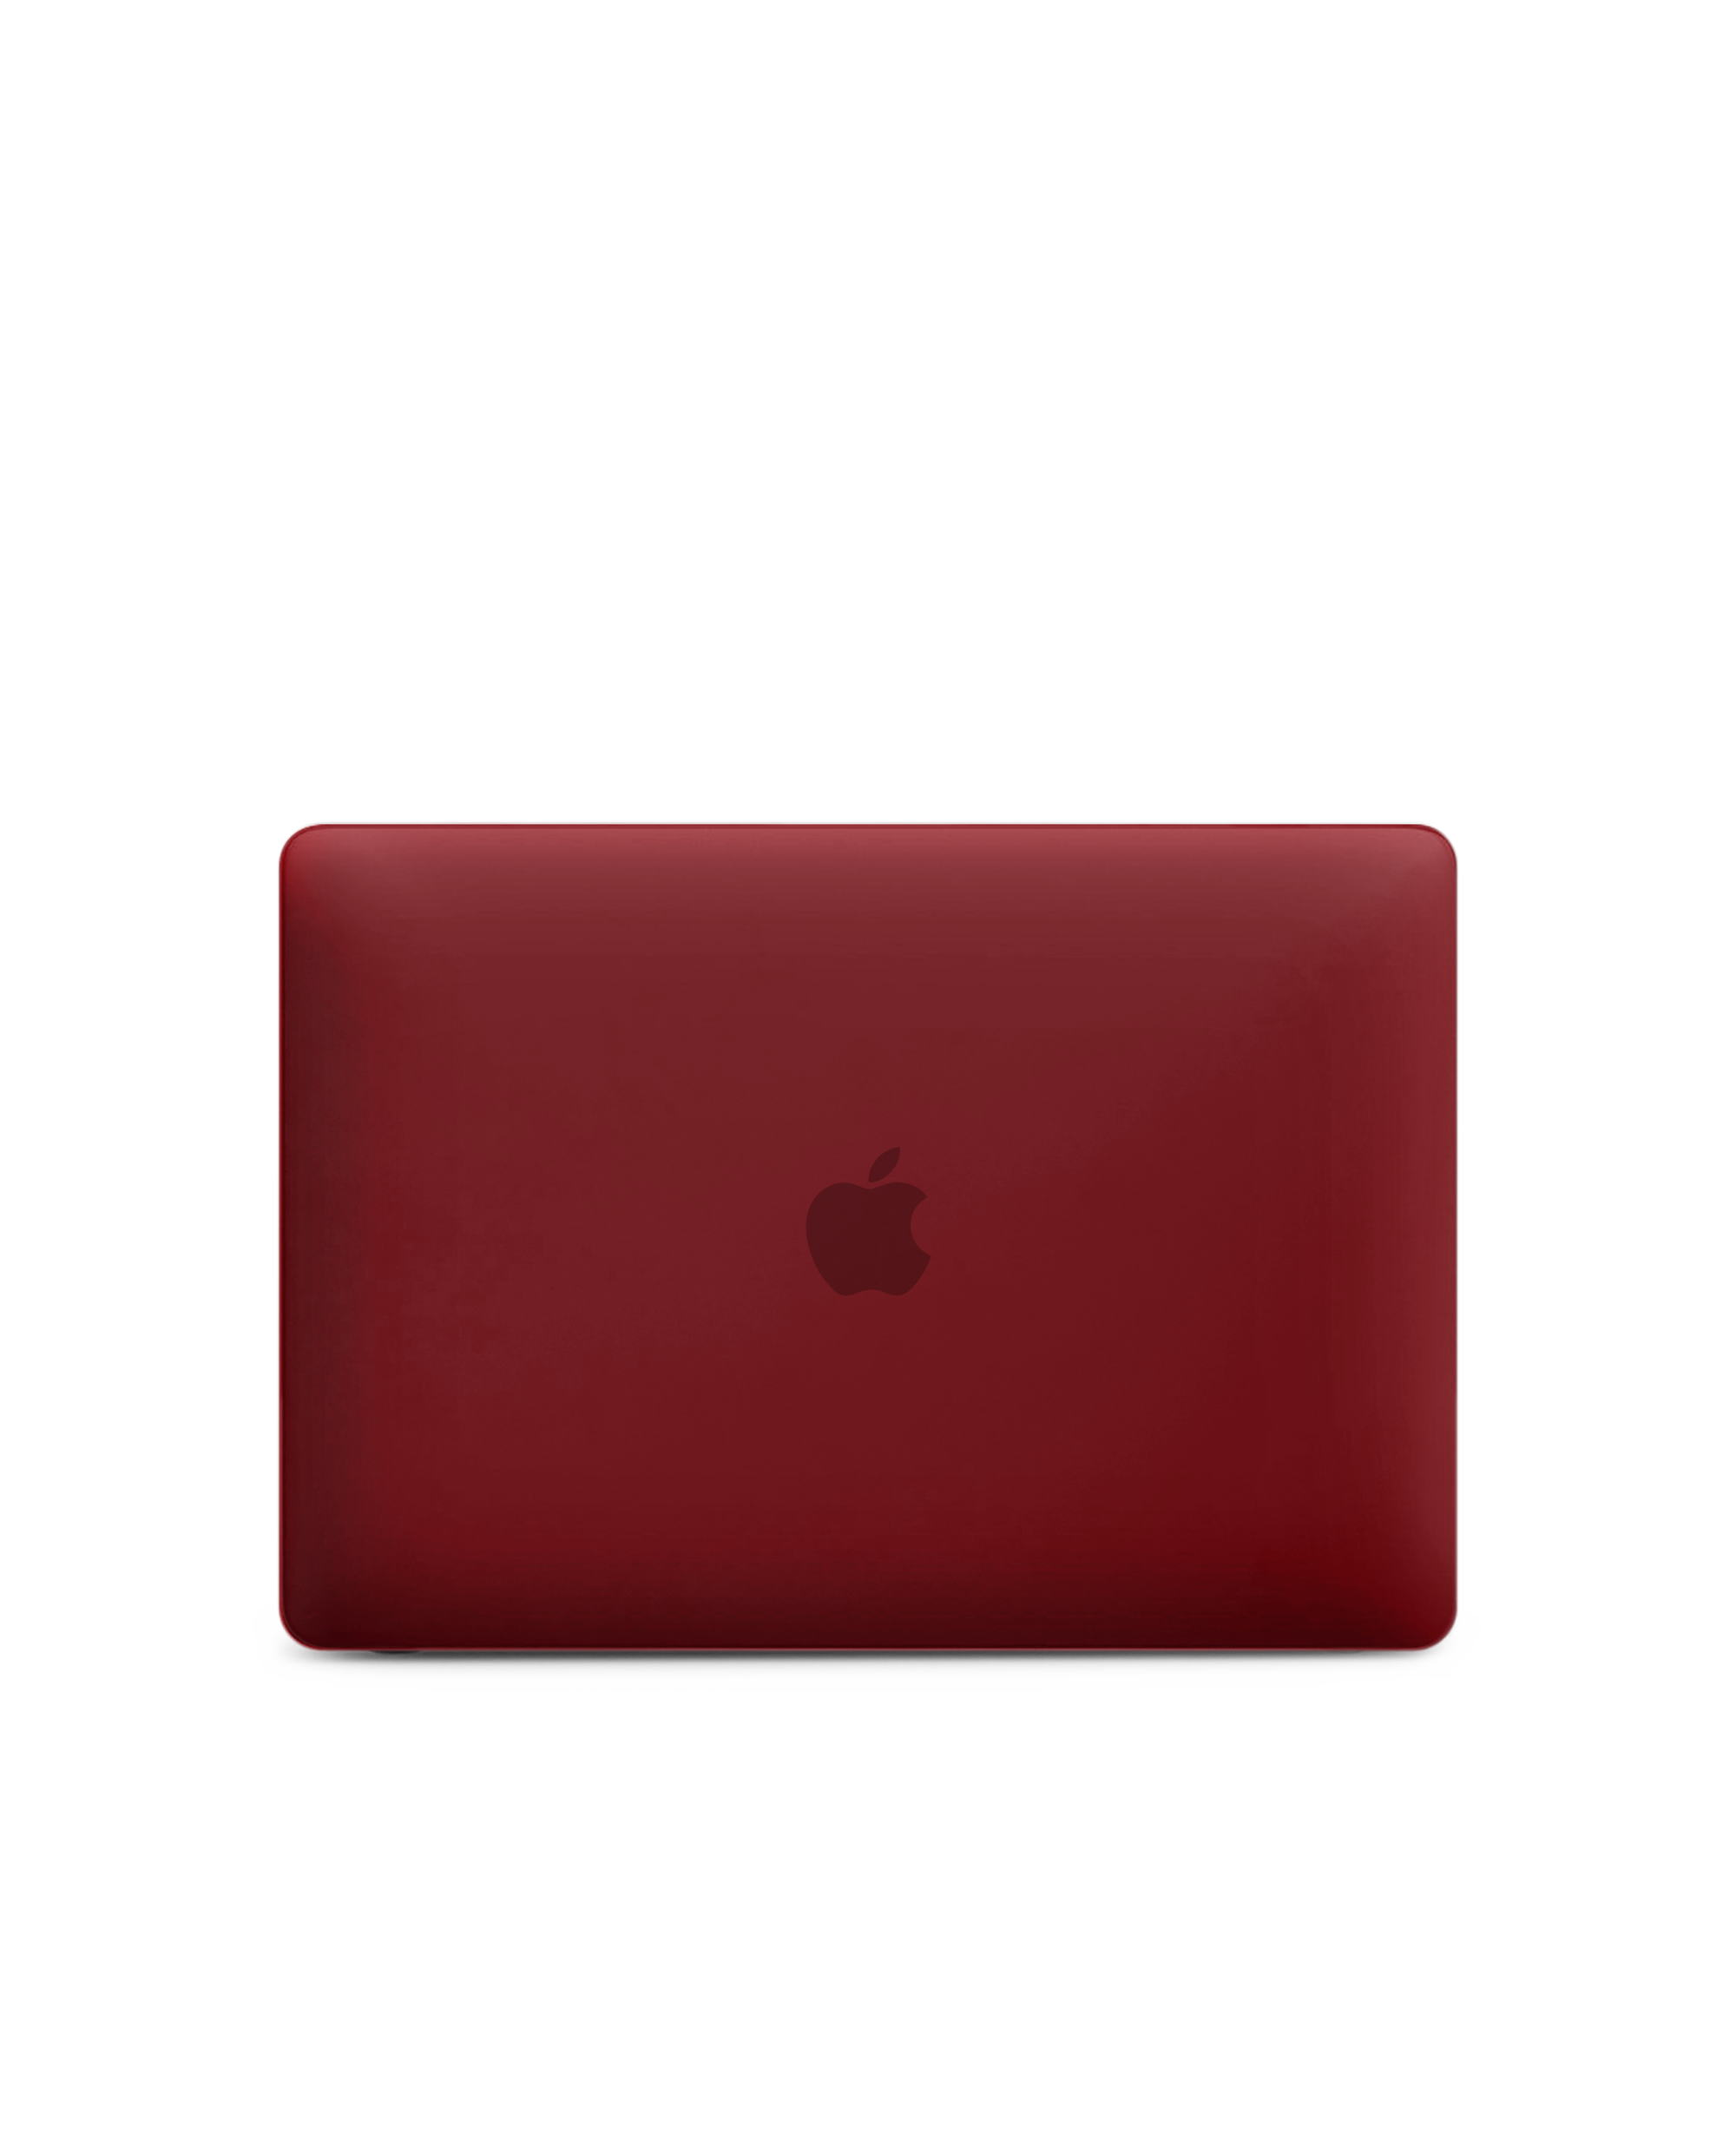 Red Frosted Hardshell Case for Macbook Pro 13 2020